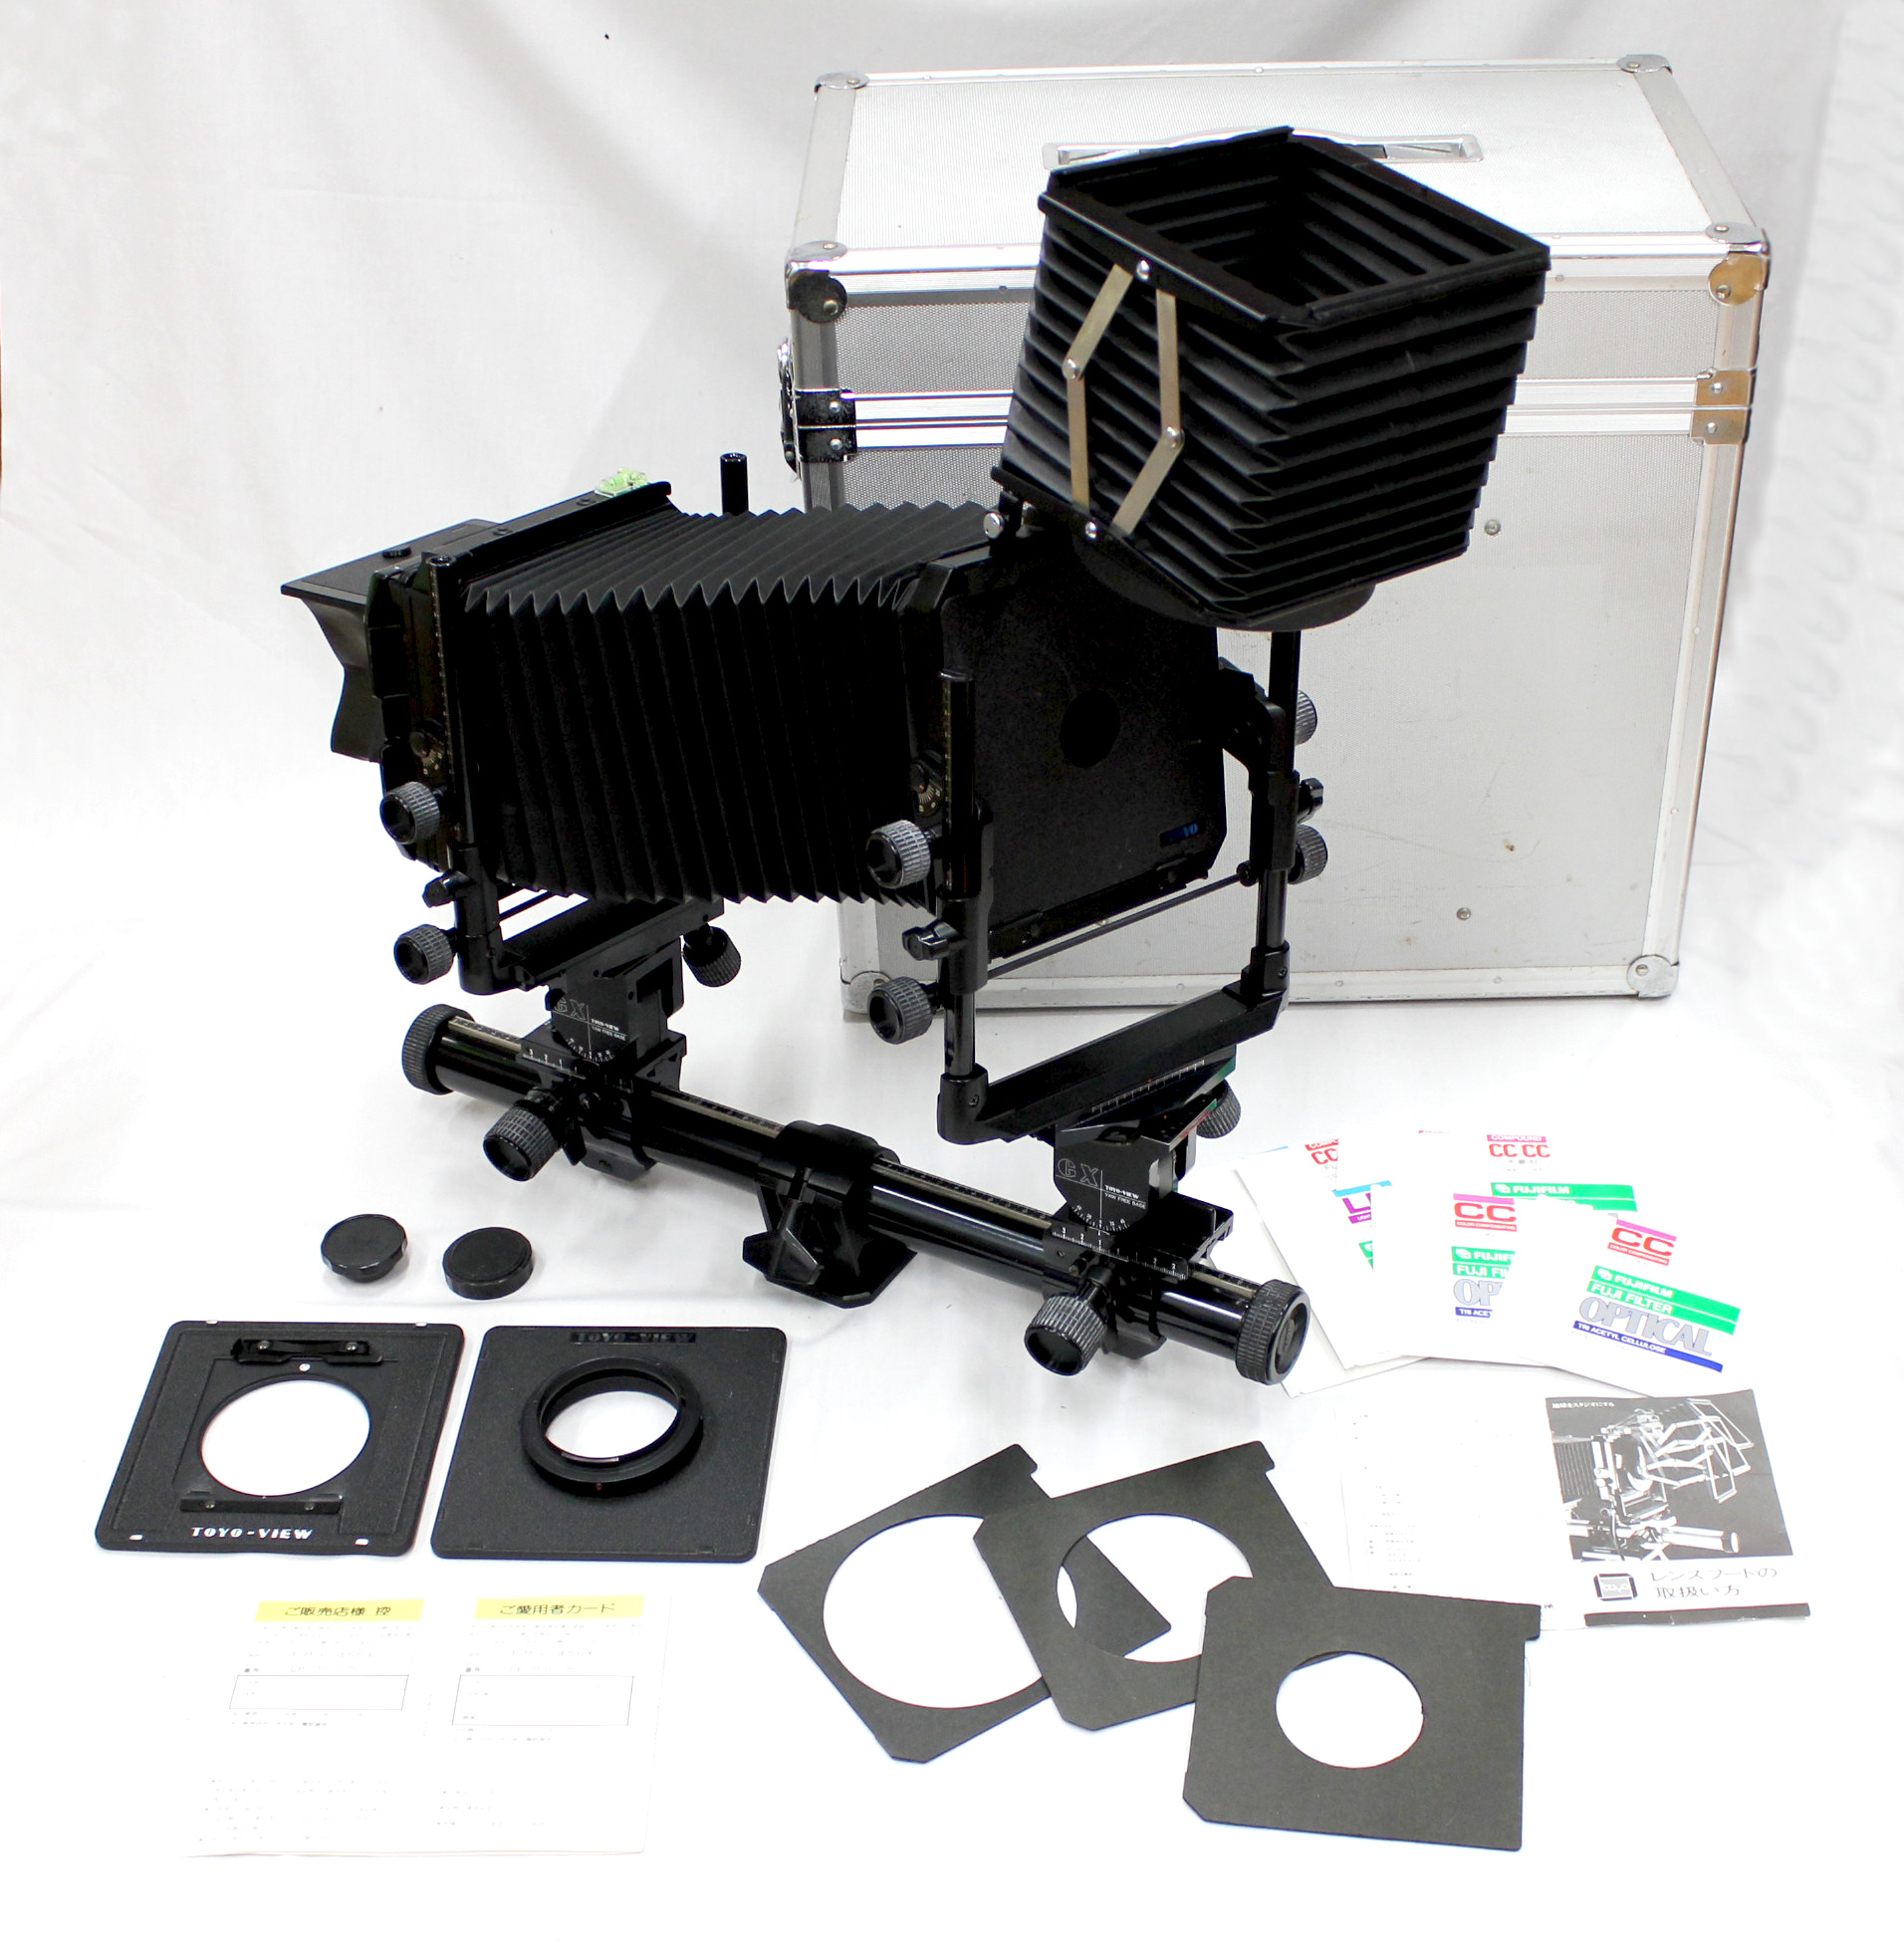 Toyo-View 45GX Yaw Free 4x5 Large Format Monorail Camera Body with Lens Hood, Linhof Adapter etc. from Japan